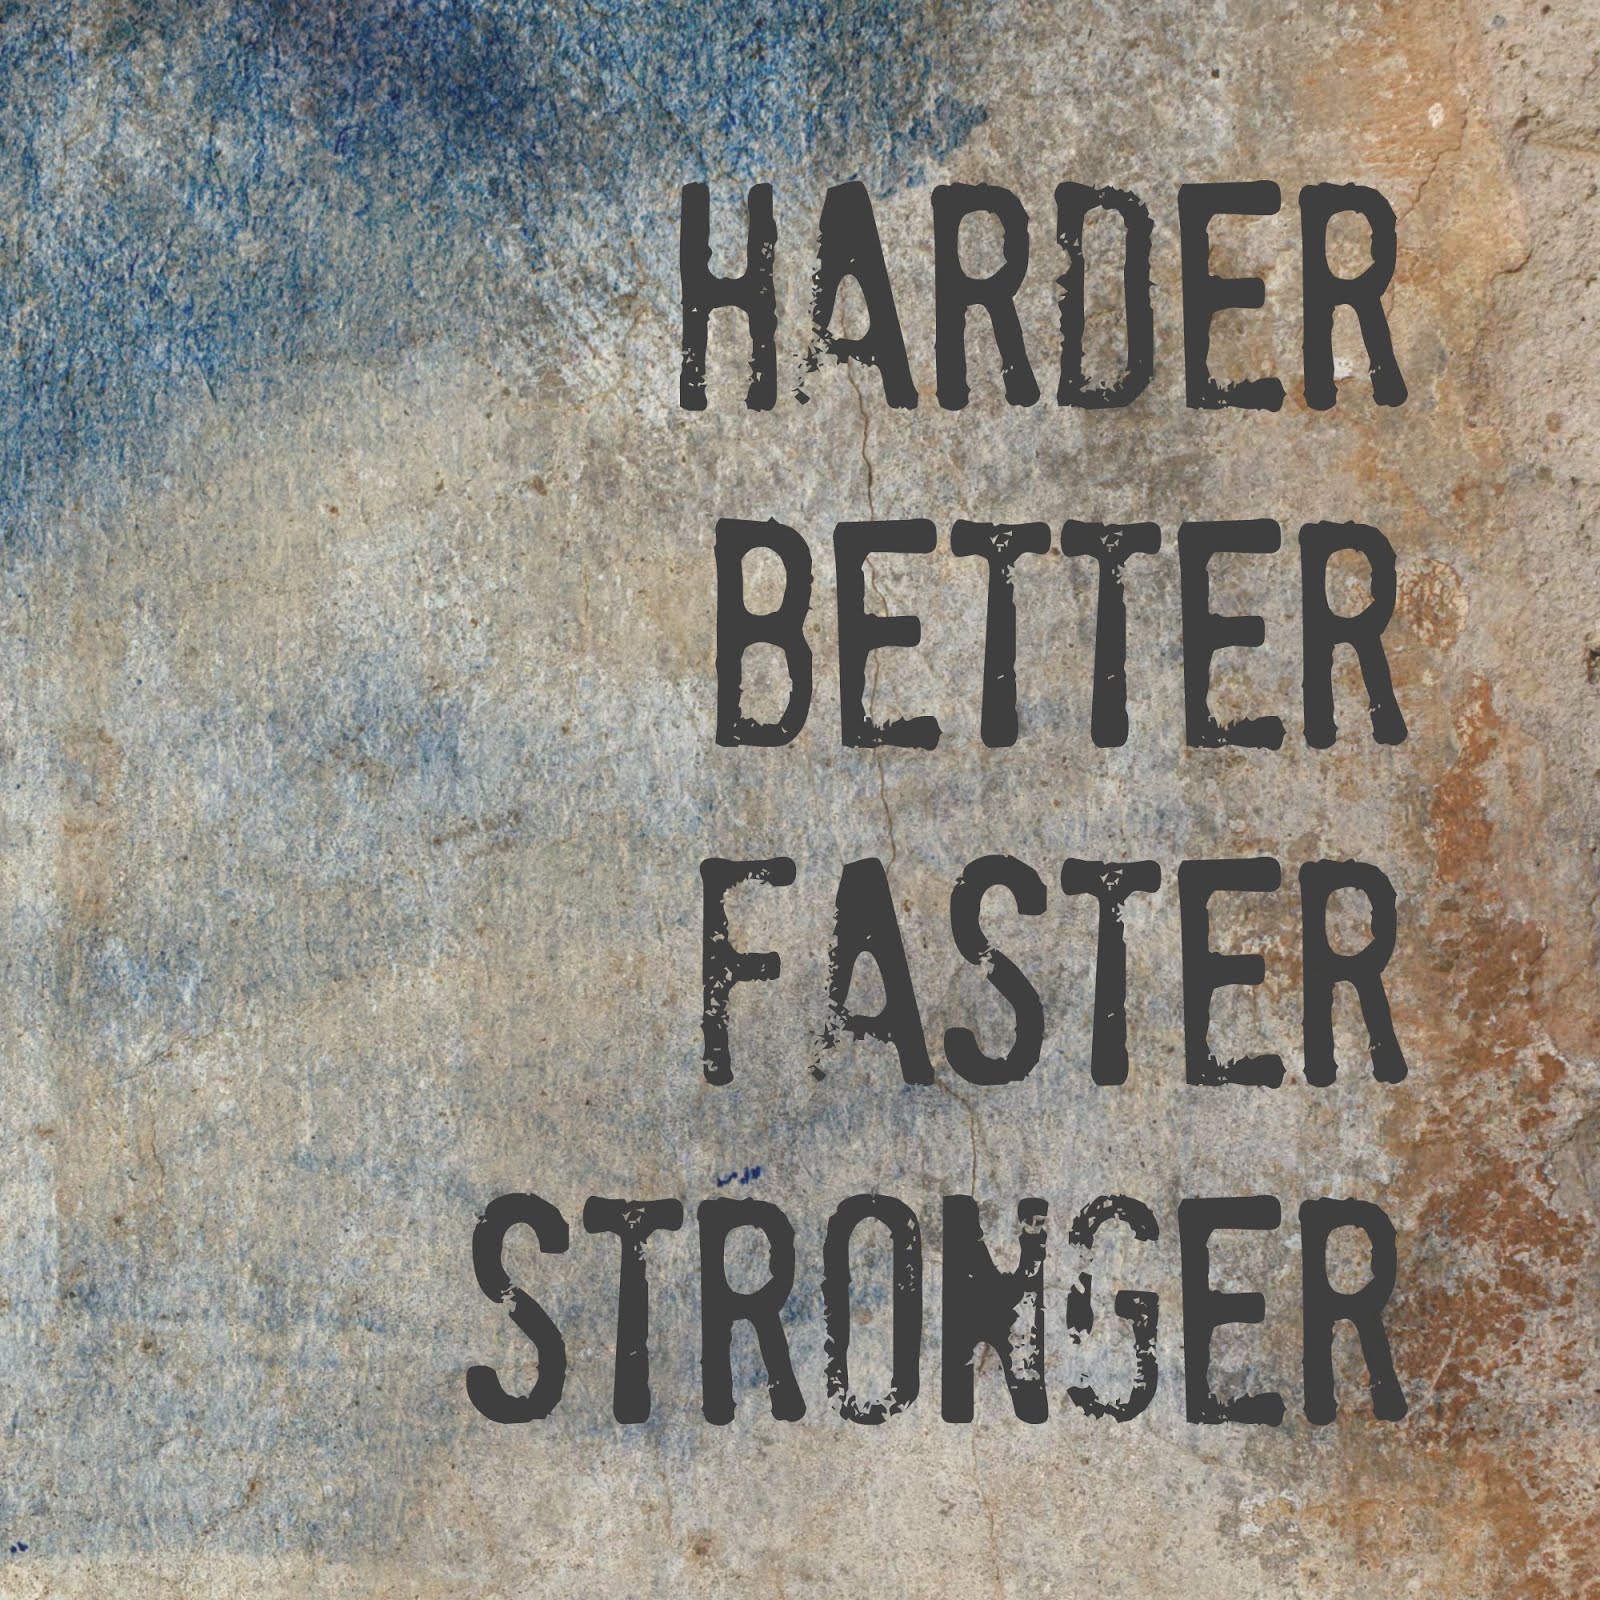 Faster and harder перевод. Stronger better faster. Harder better. Better harder better faster. Harder, better, faster, stronger Sport.